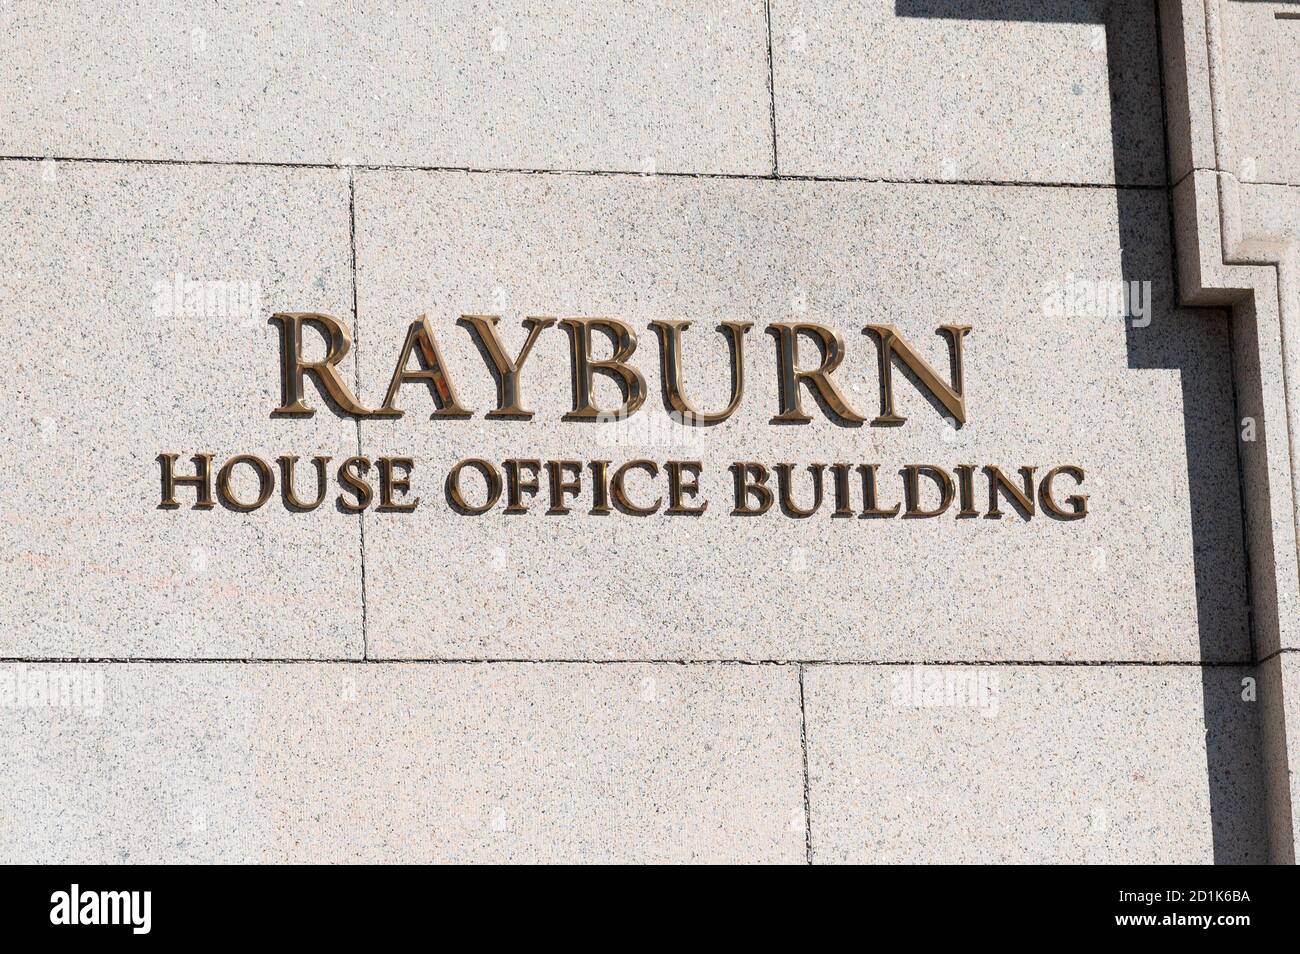 Washington, United States. 05th Oct, 2020. The Rayburn House office building located near the U.S. Capitol. Credit: SOPA Images Limited/Alamy Live News Stock Photo